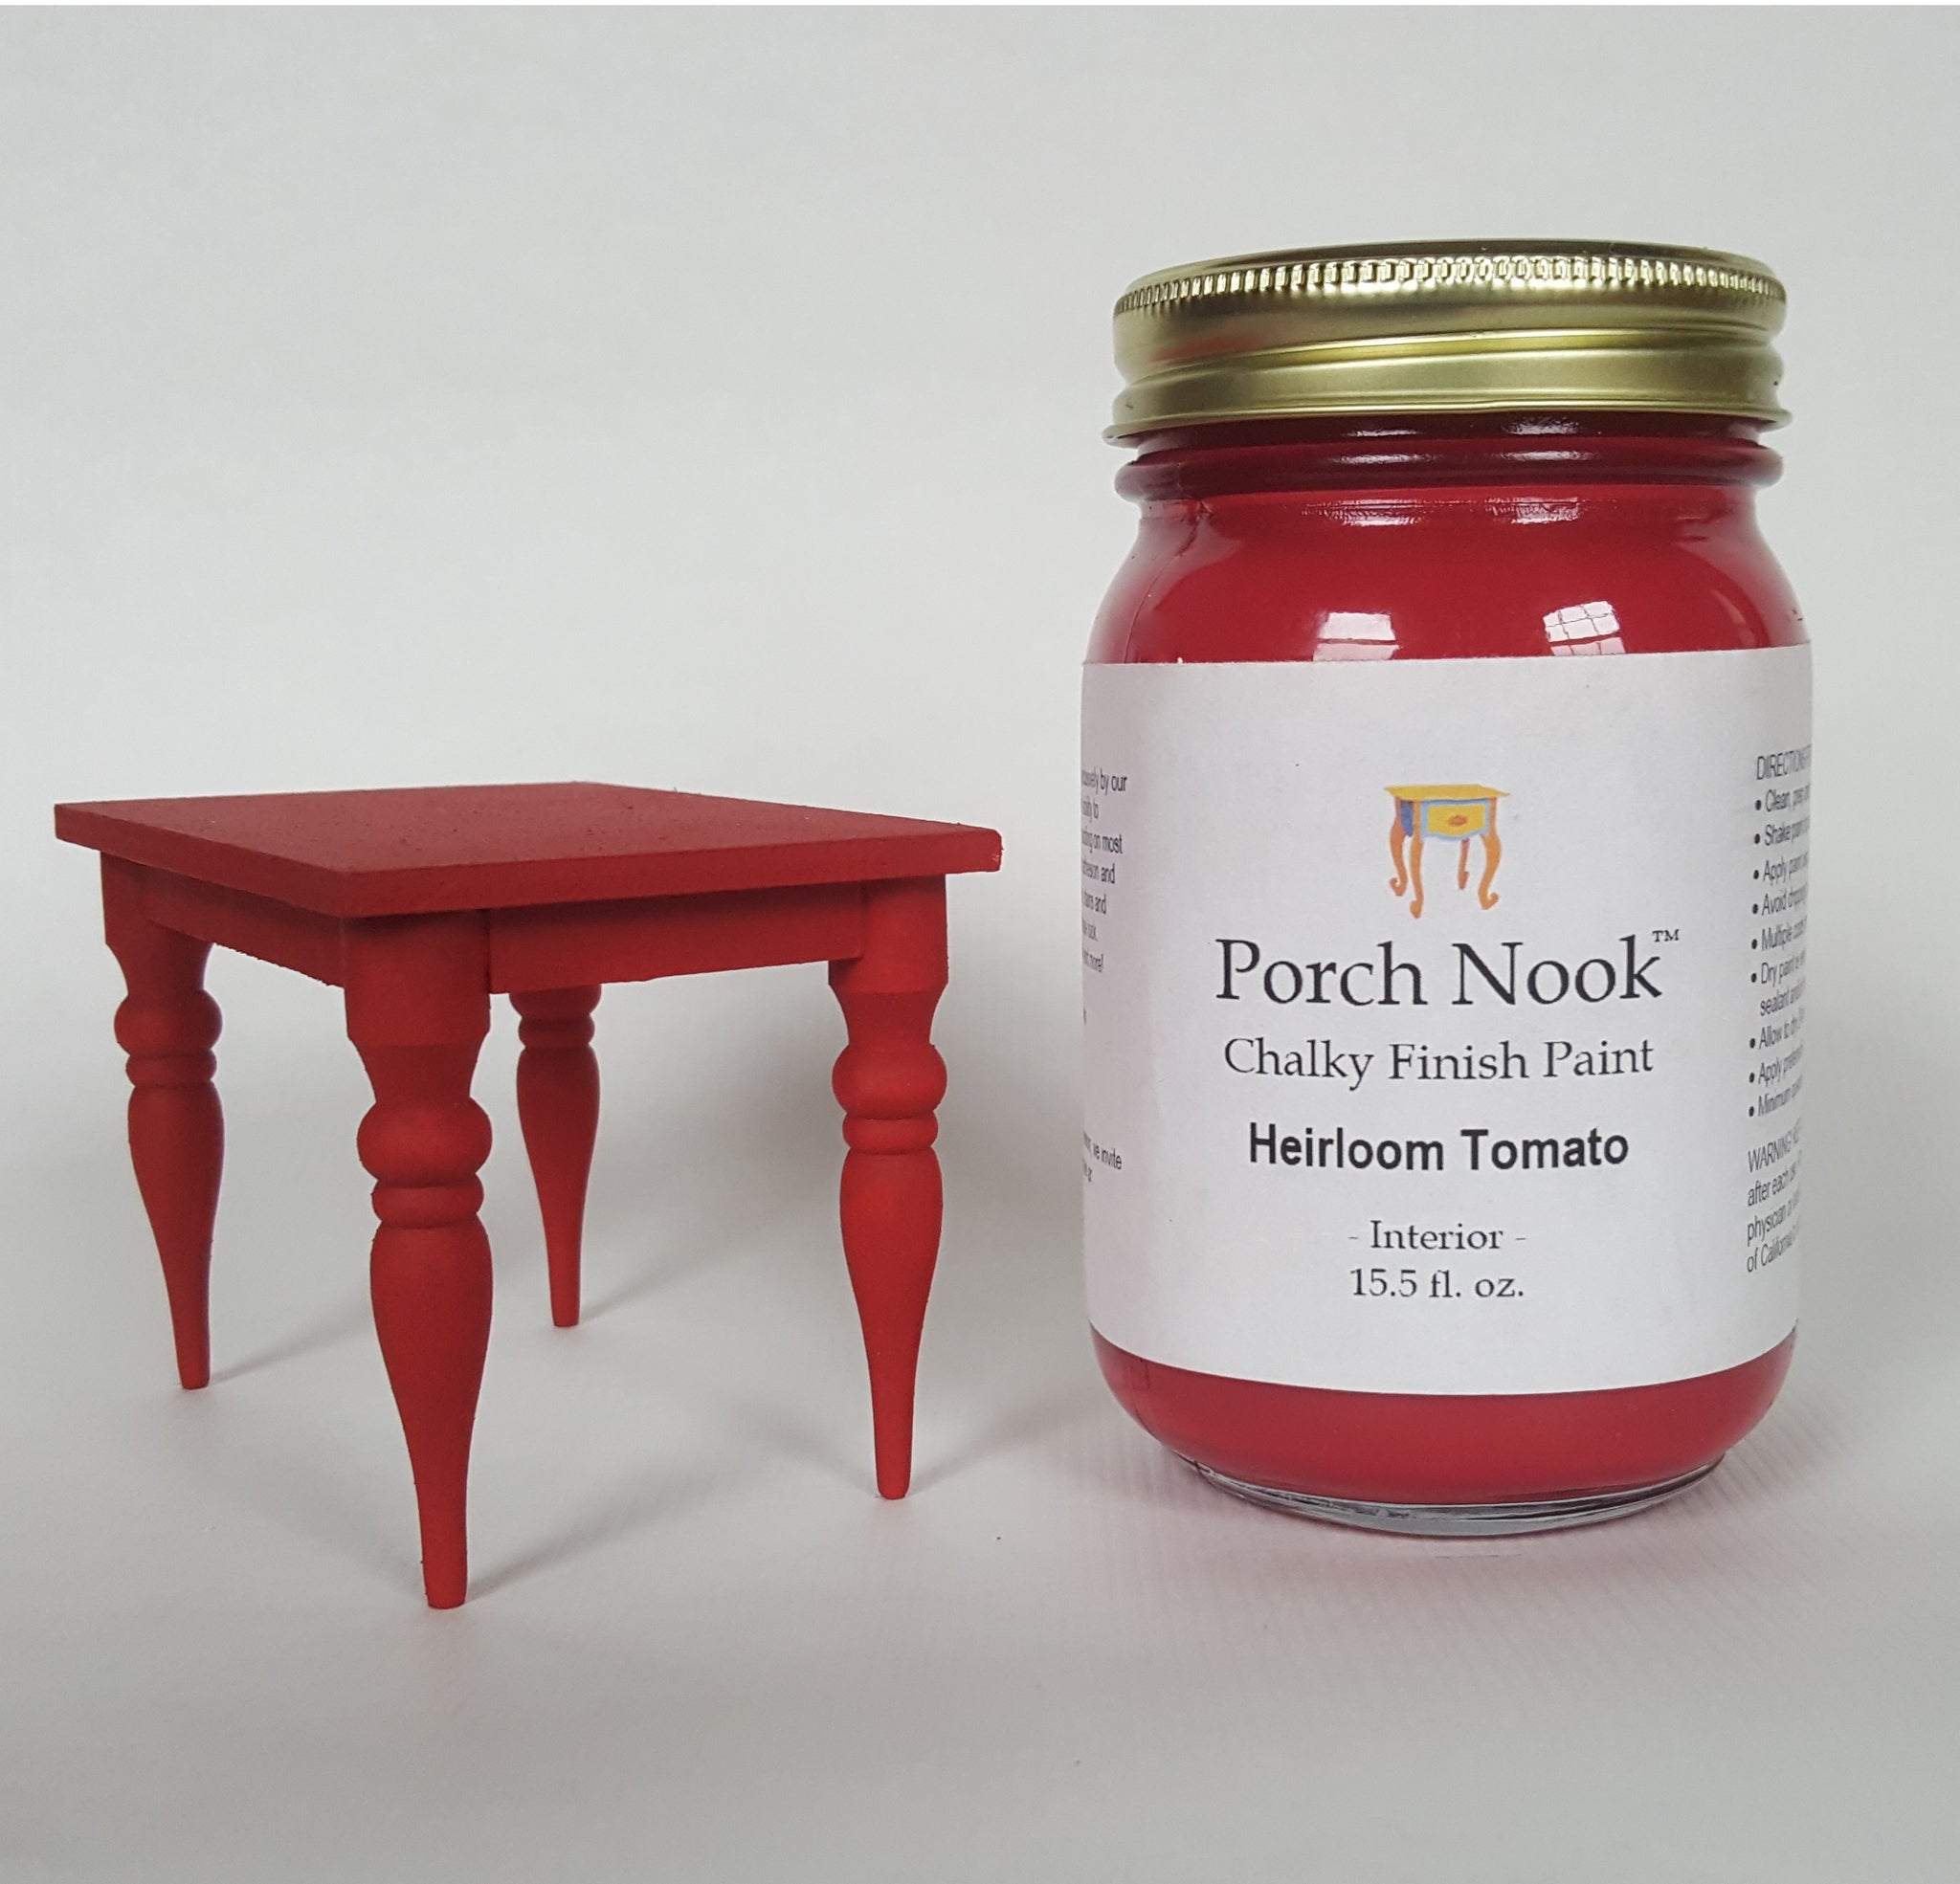 Porch Nook  Heirloom Tomato Furniture Paint by Porch Nook